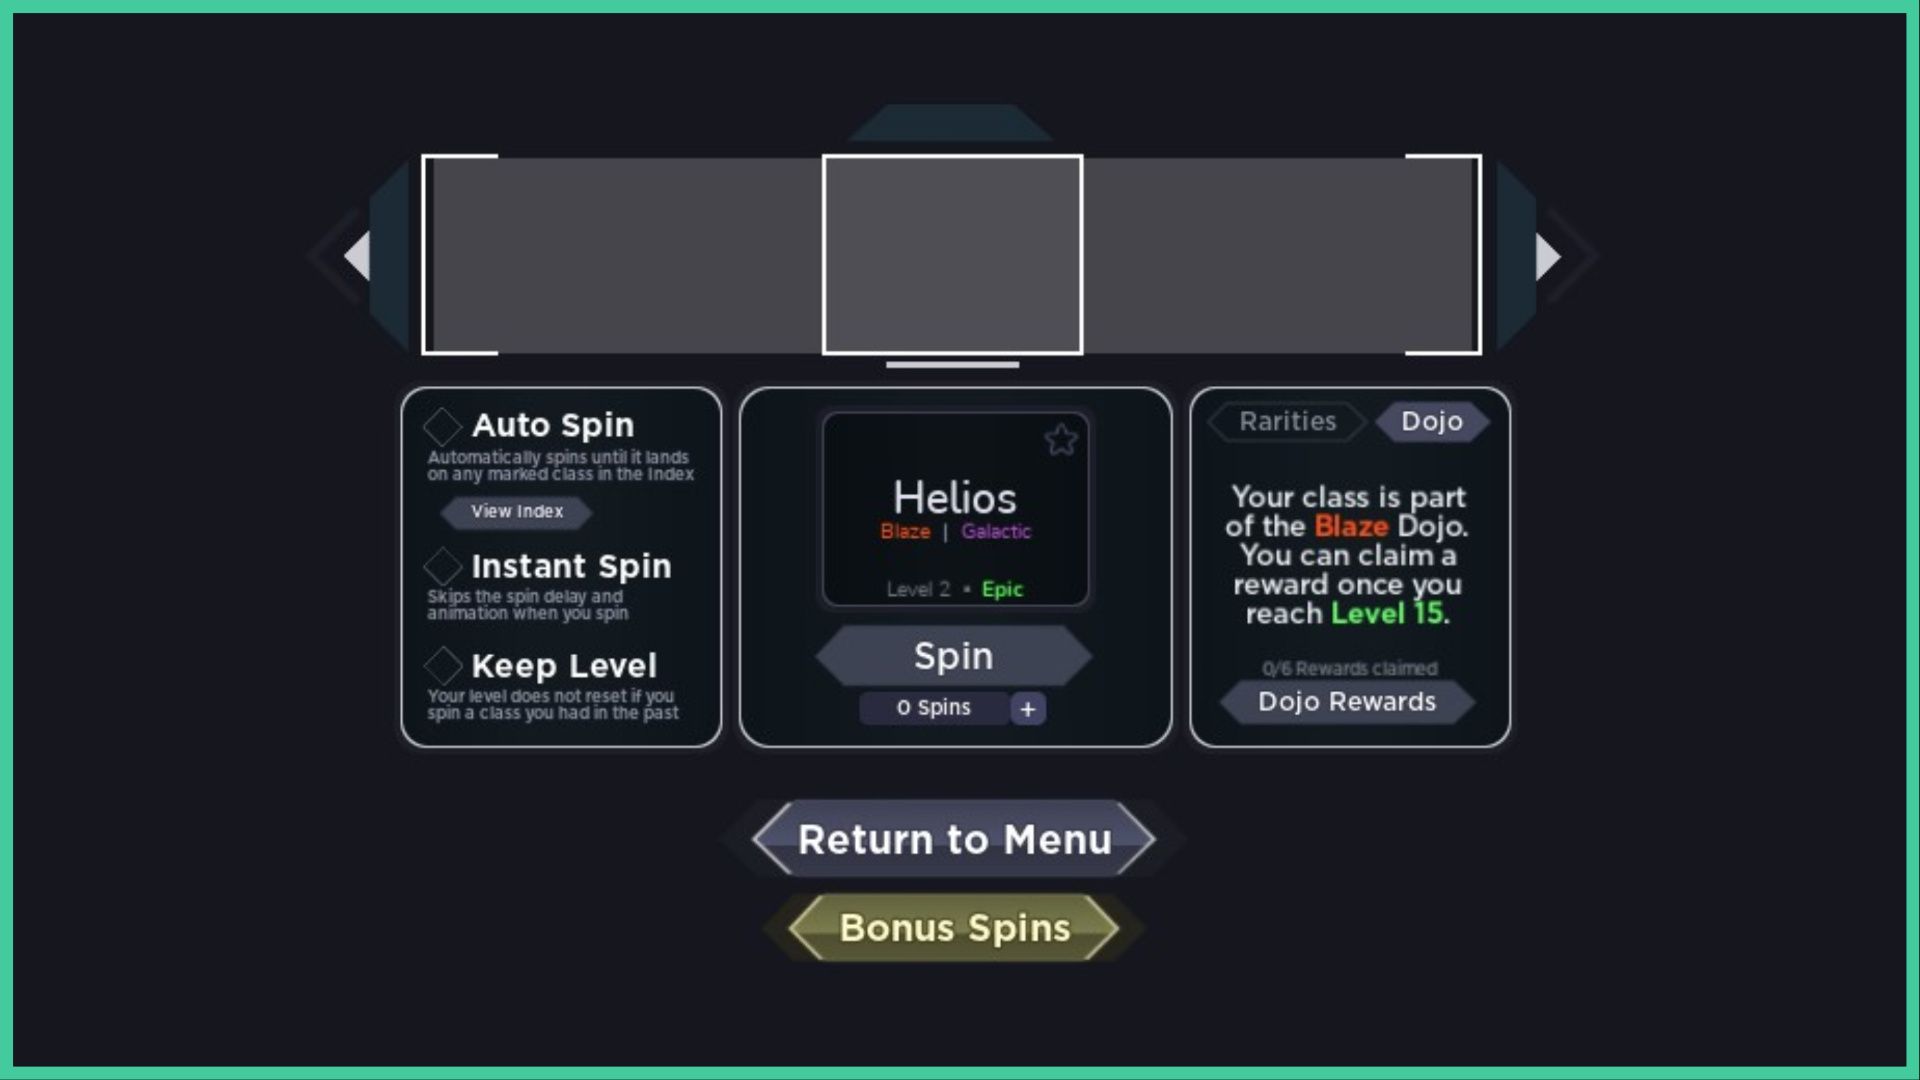 feature image for our nightmare elemental dojo tier list, the image features a screenshot from the spin menu with the rarities tab, dojo tab, spin options, and the spin button, the text in the dojo tab reads "your class is part of the blaze dojo, you can claim a reward once you reach level 15"